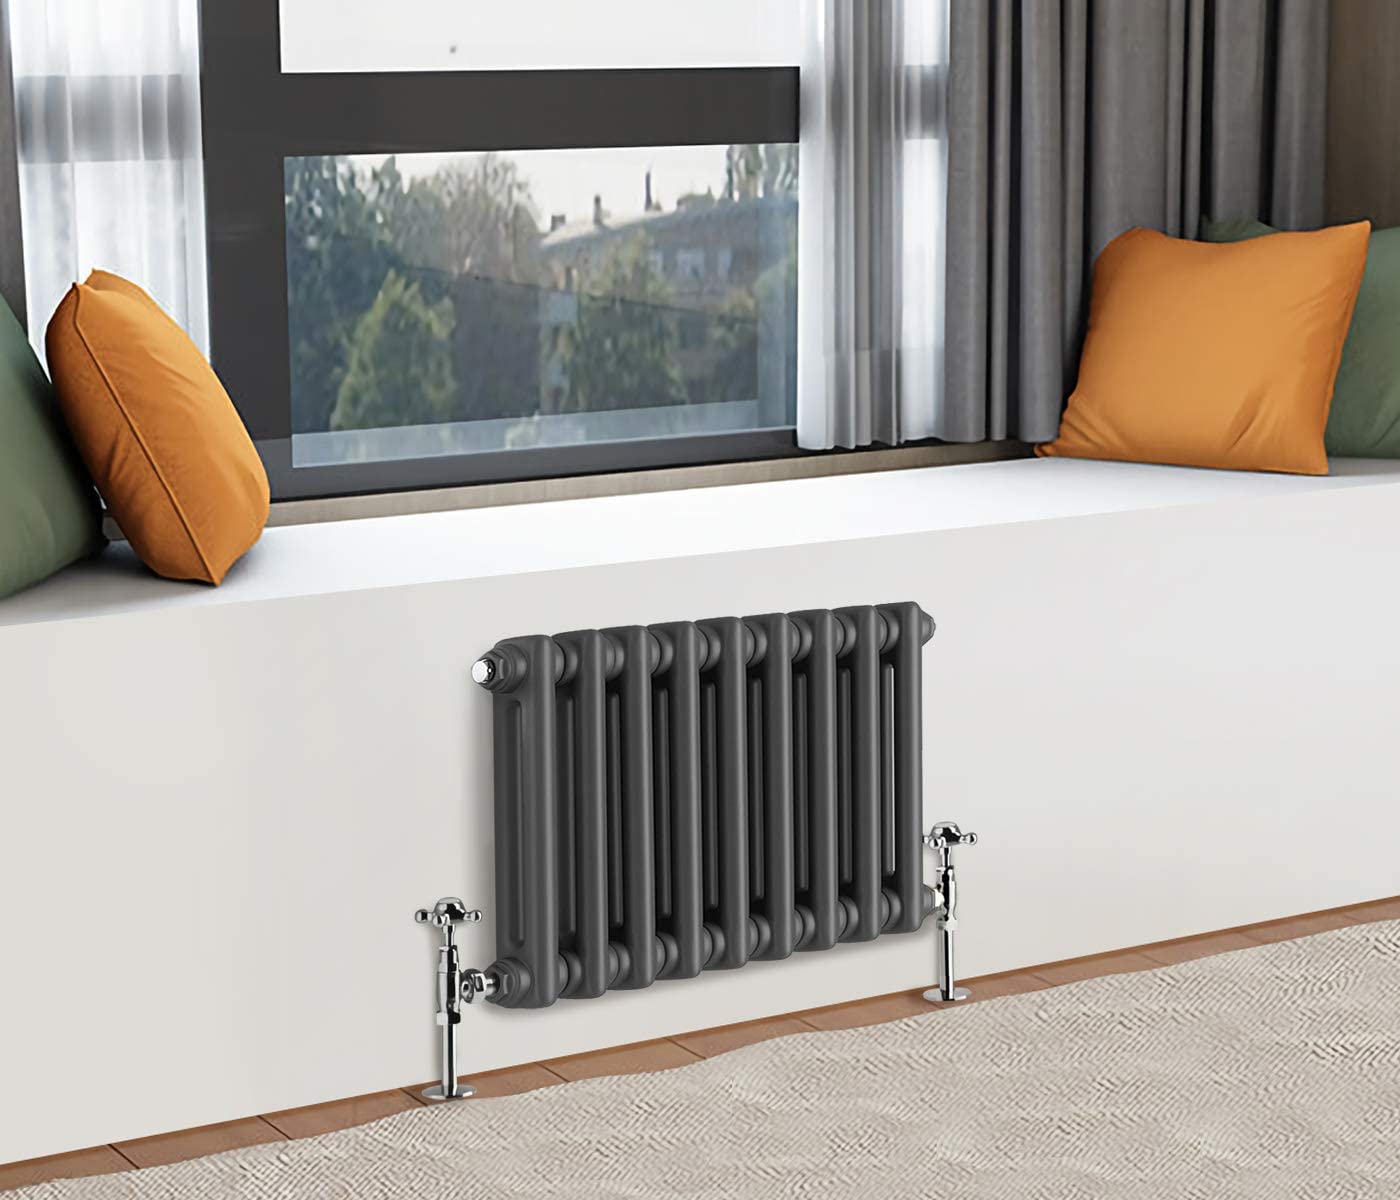 What is Heating Radiator